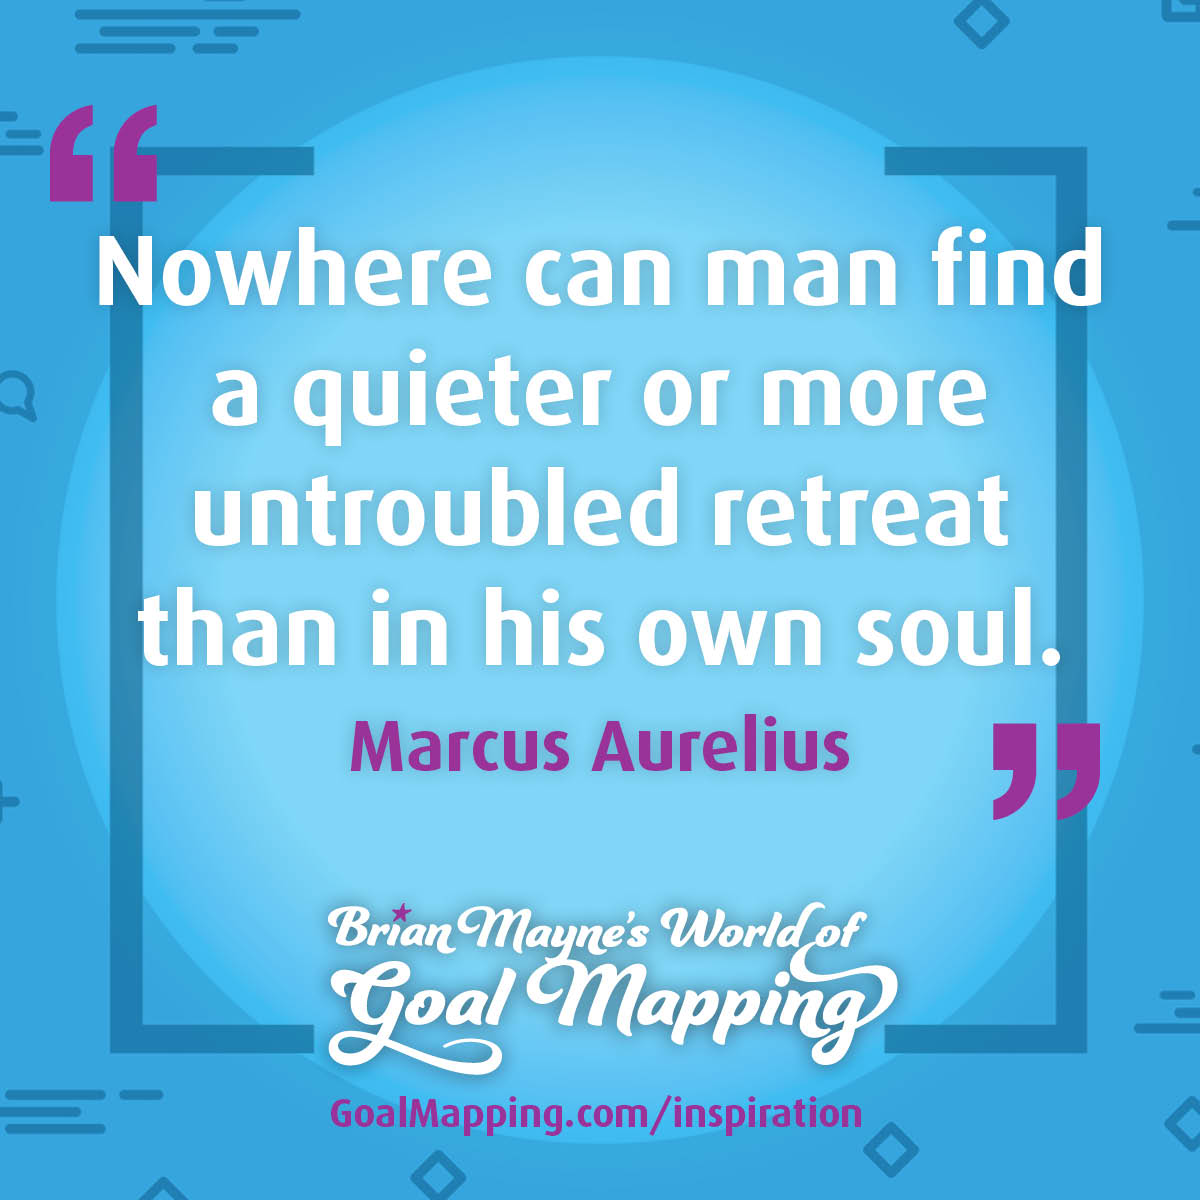 "Nowhere can man find a quieter or more untroubled retreat than in his own soul." Marcus Aurelius